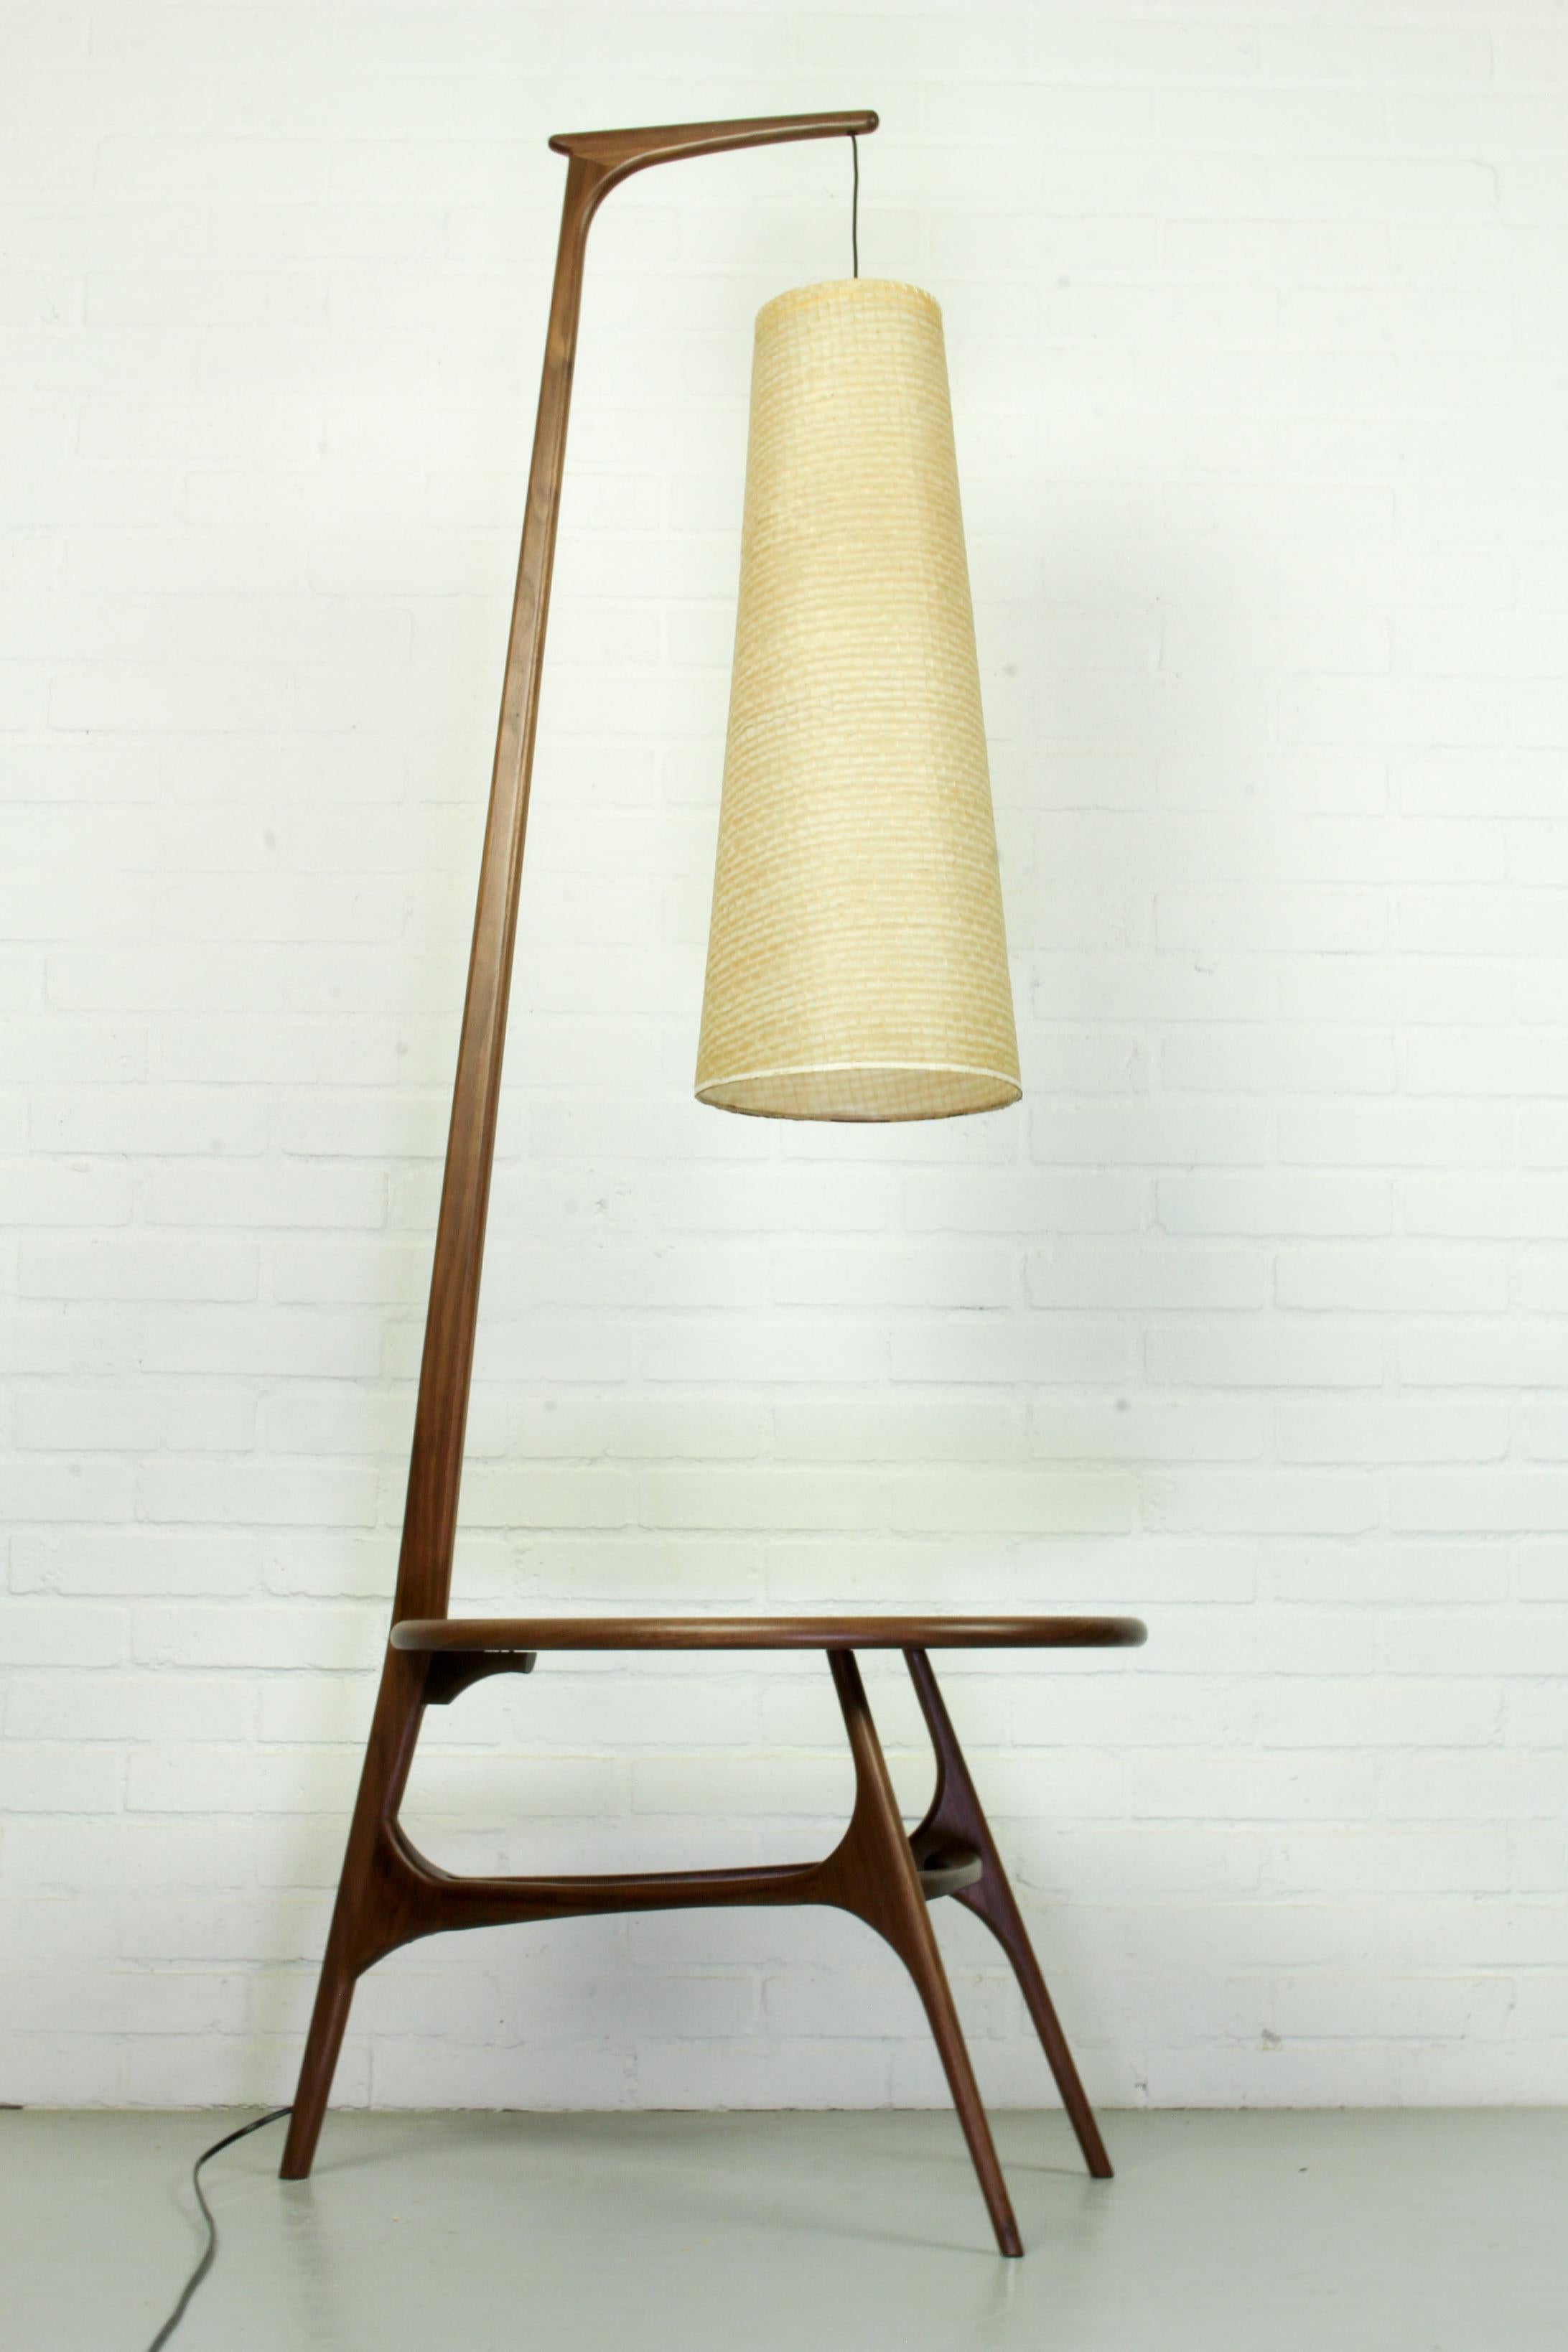 This midcentury Rispal lampshade has a beautiful shape. The lamp is completed with a new organically shaped American nut table and foot so it can be used as a standing floor lamp. The lampshade itself is in an original and good vintage condition.